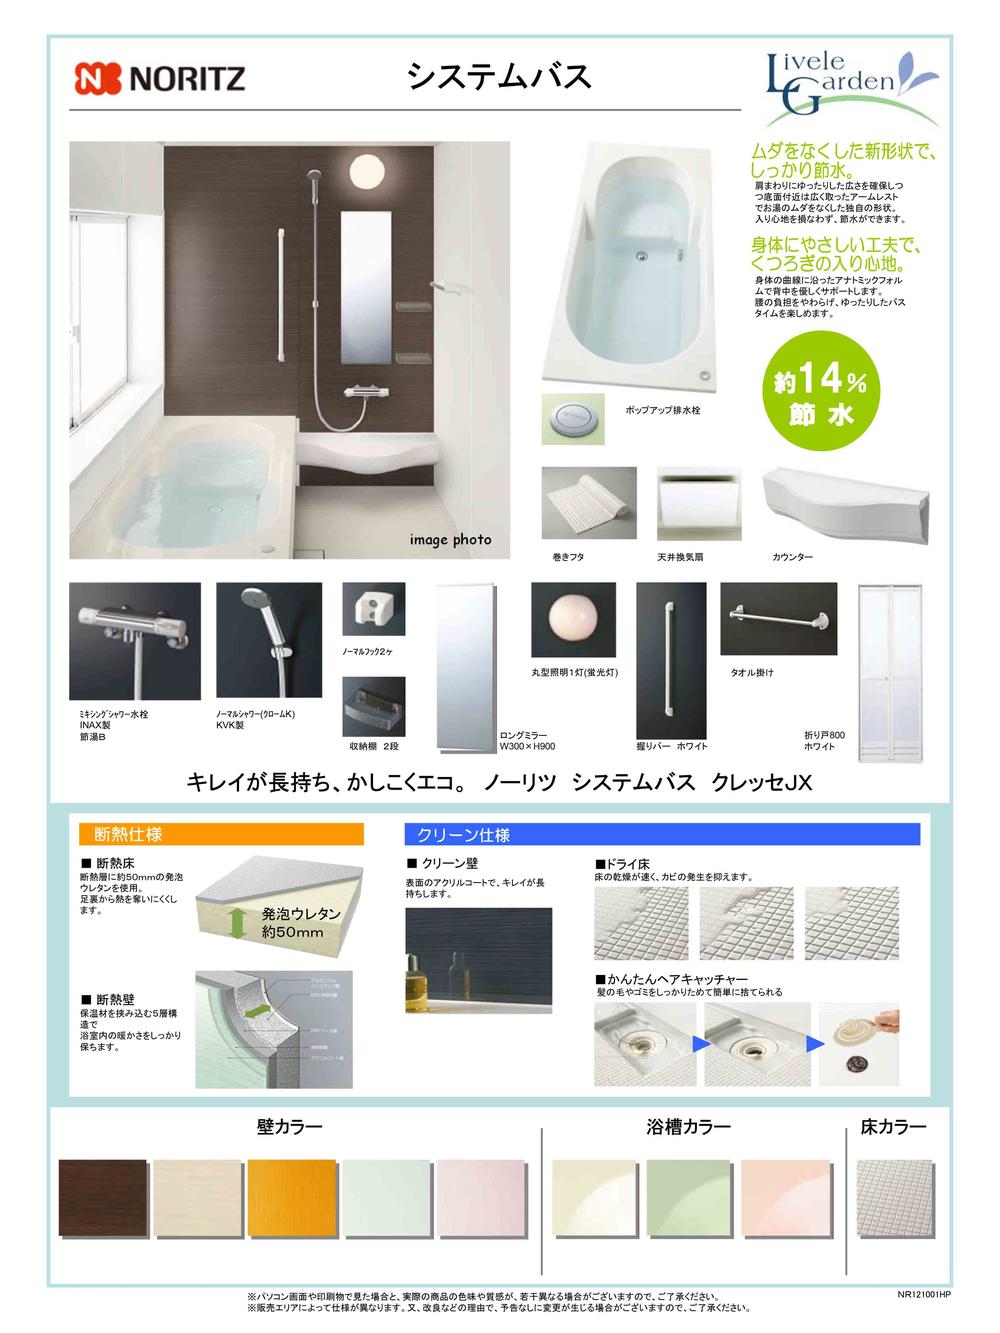 Other. Bathroom specification